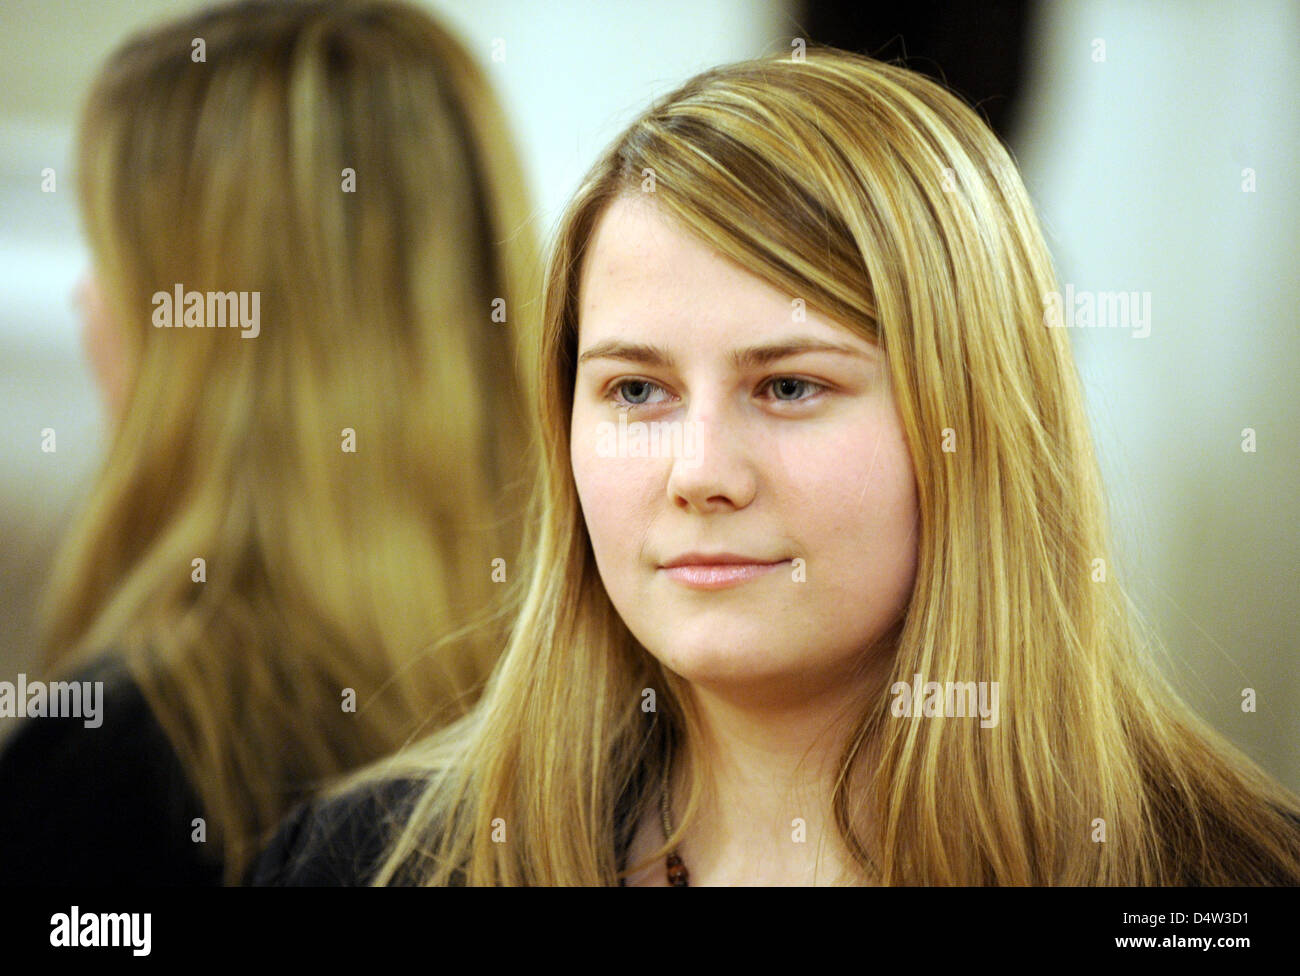 Austrian Natascha Kampusch pictured prior to the presentation of the German television station 'NDR's' documentary 'Natascha Kampusch - 3096 days imprisonment' ('Natascha Kampusch - 3096 Tage Gefangenschaft') in Hamburg, Germany, 14 December 2009. In the documentary, which will air on 25 January 2010, 21-year-old Kampusch grants insight into her imprisonment, gives an account of he Stock Photo